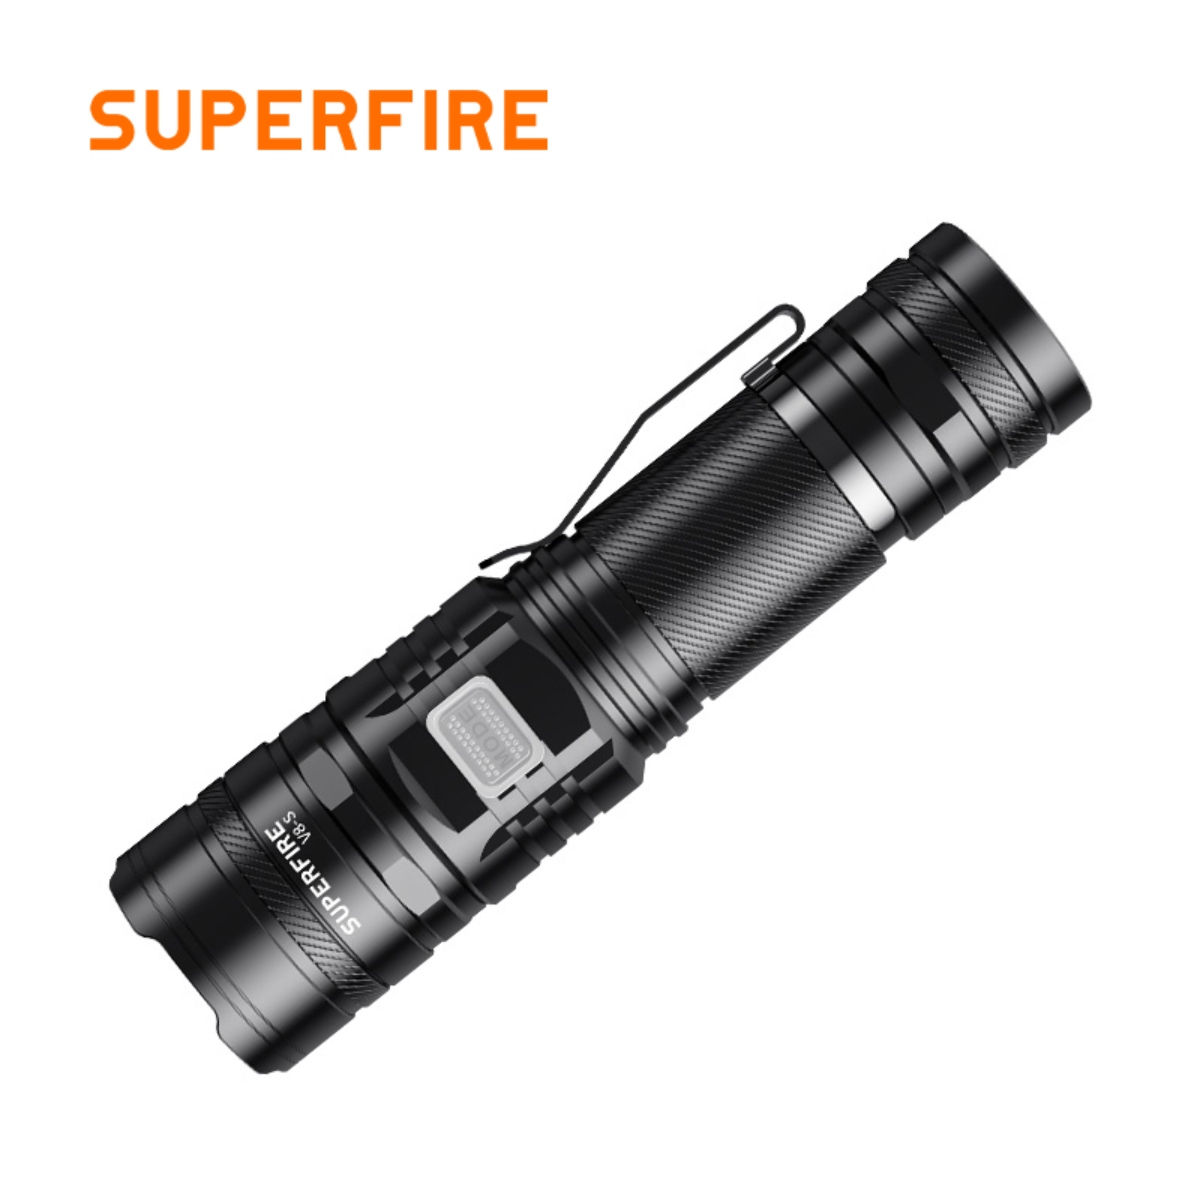 V8-S rechargeable high power Tactical flashlight